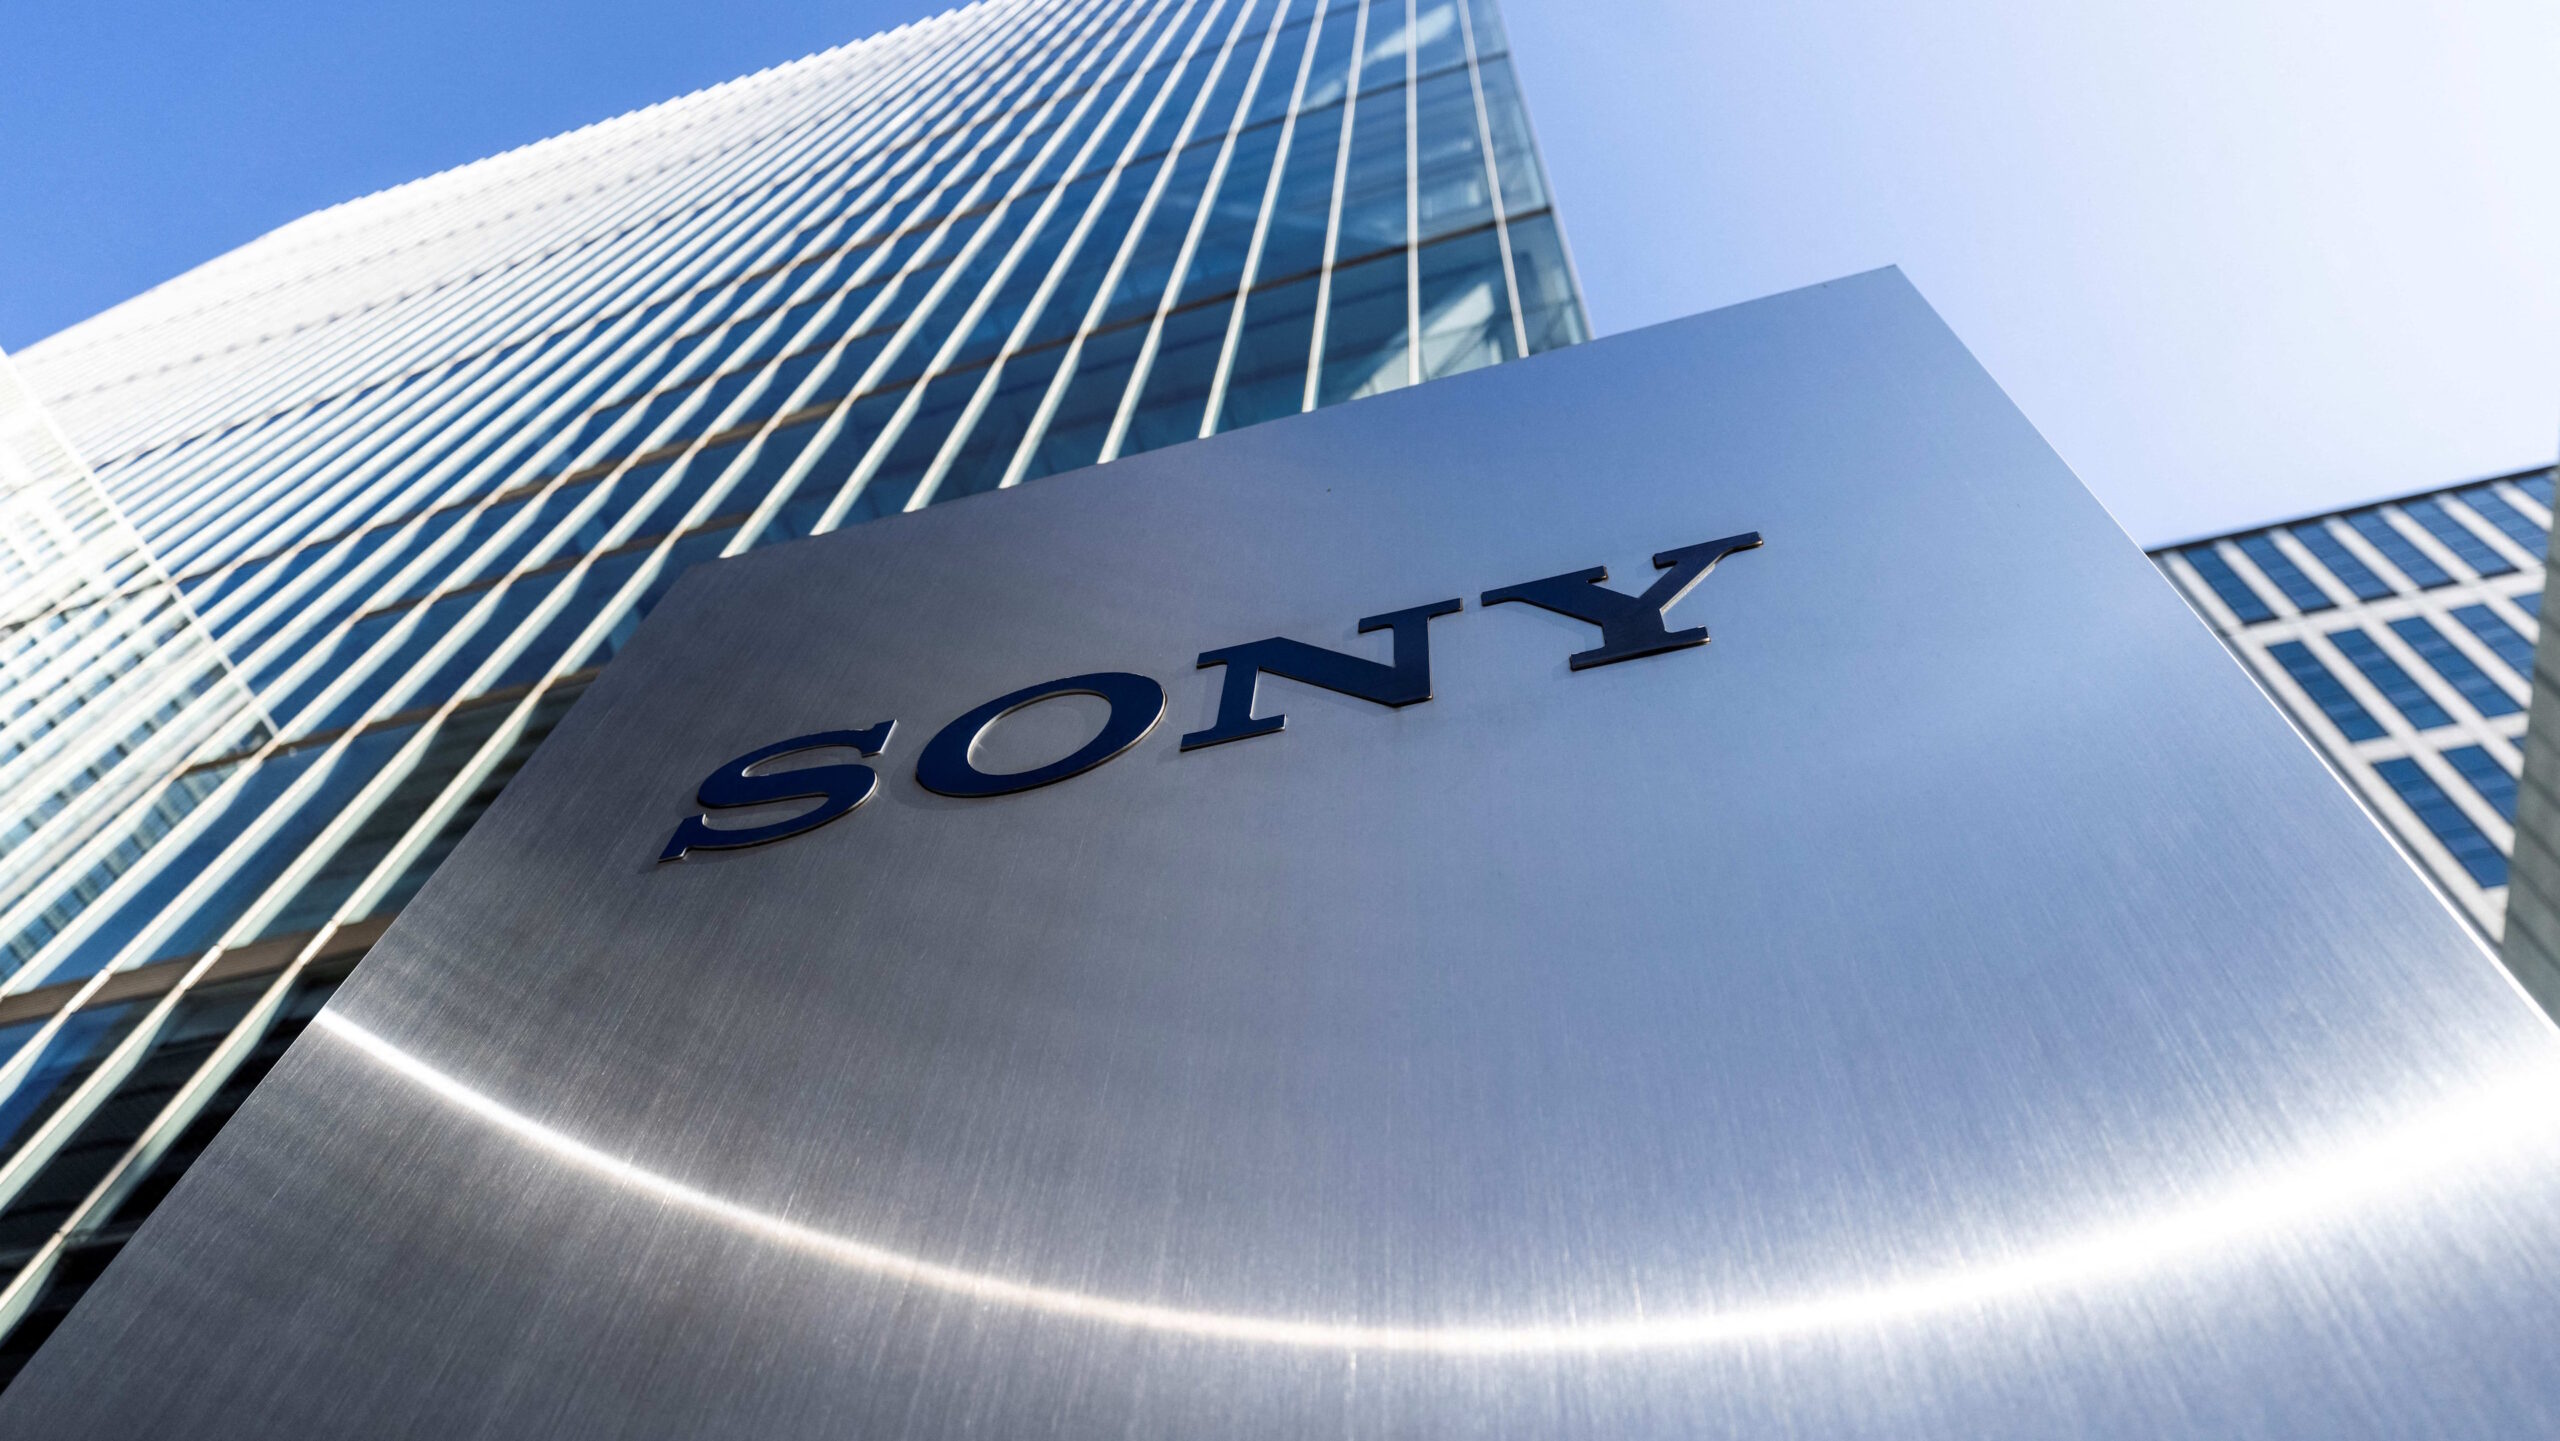 Sony Music Issues Warning to Over 700 Tech Companies for Unauthorized AI Training